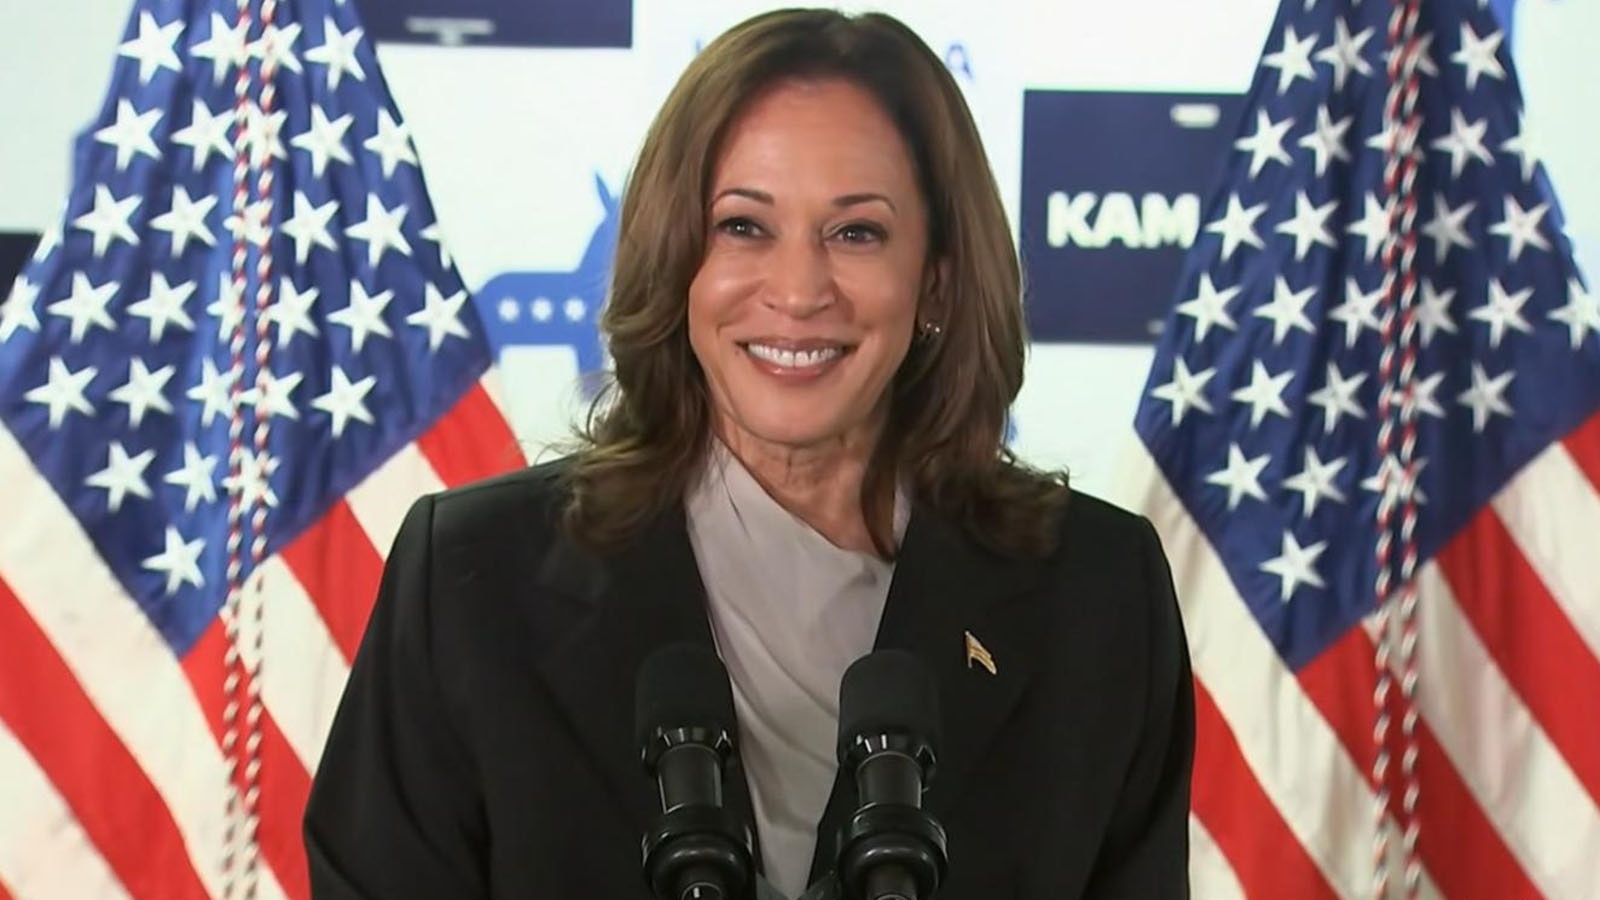 Kamala Harris to take over for Biden after support from Pelosi, Obama [Video]